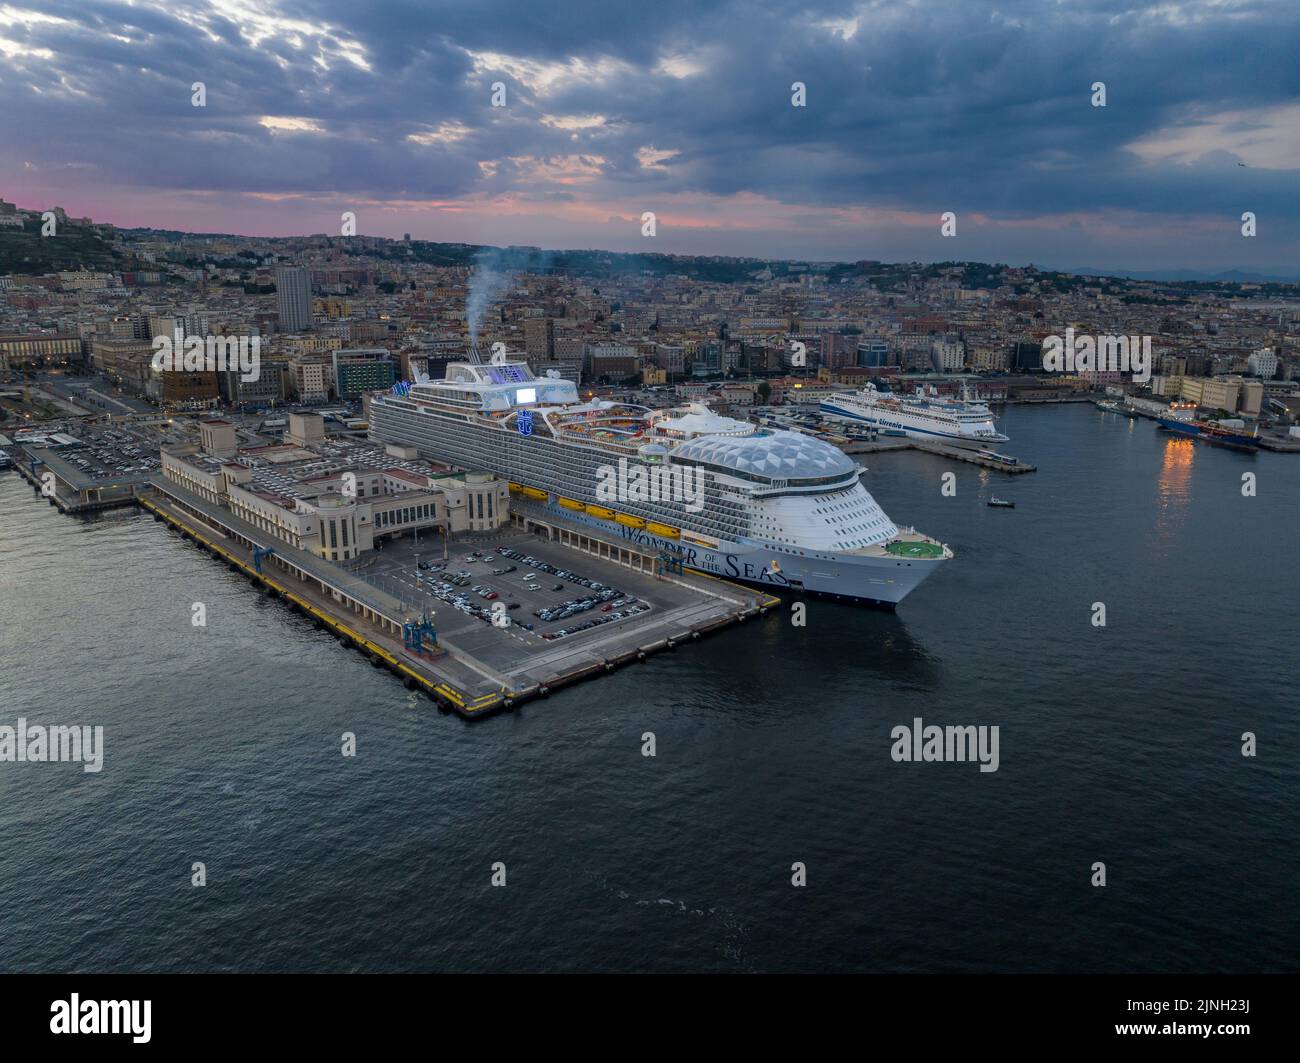 Wonder of the Seas by Royal Caribbean is The biggest cruise ship in the world in Naples port.. Aerial view Stock Photo